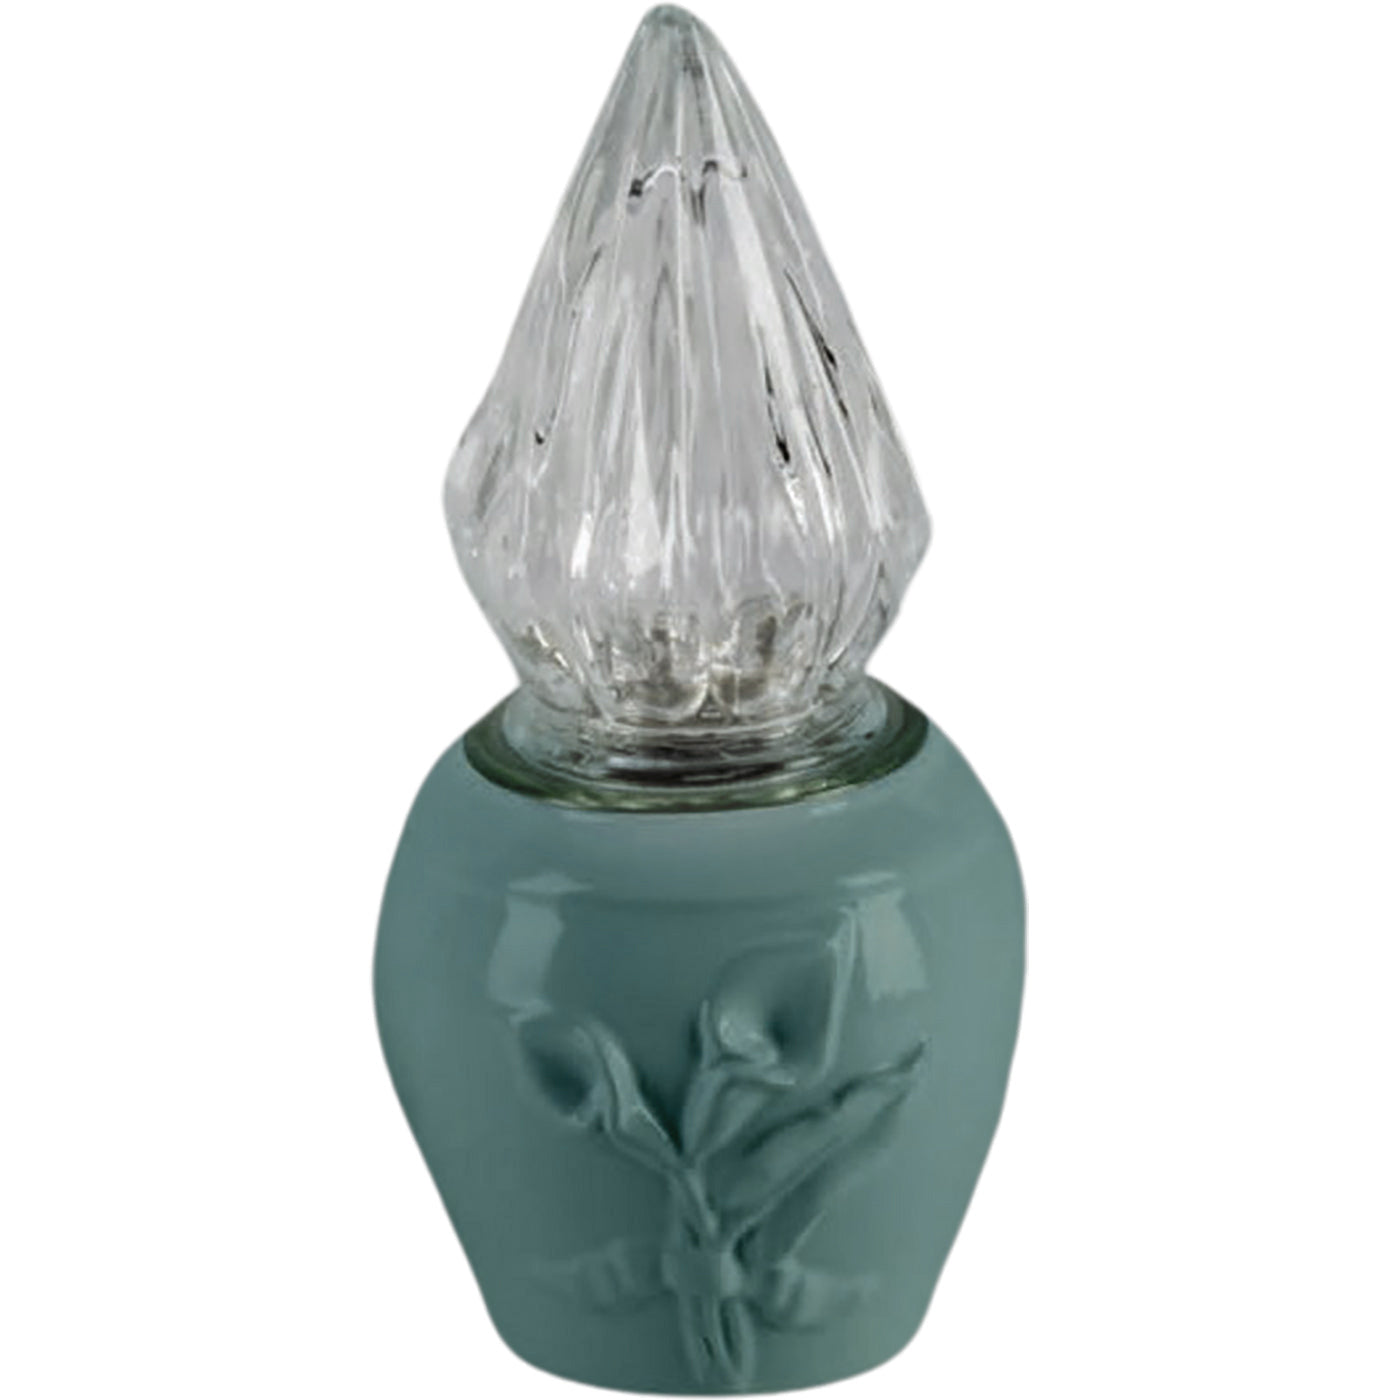 Grave light Calla green 10x10cm - 3.9x3.9in In green porcelain, wall attached CAL164P/V